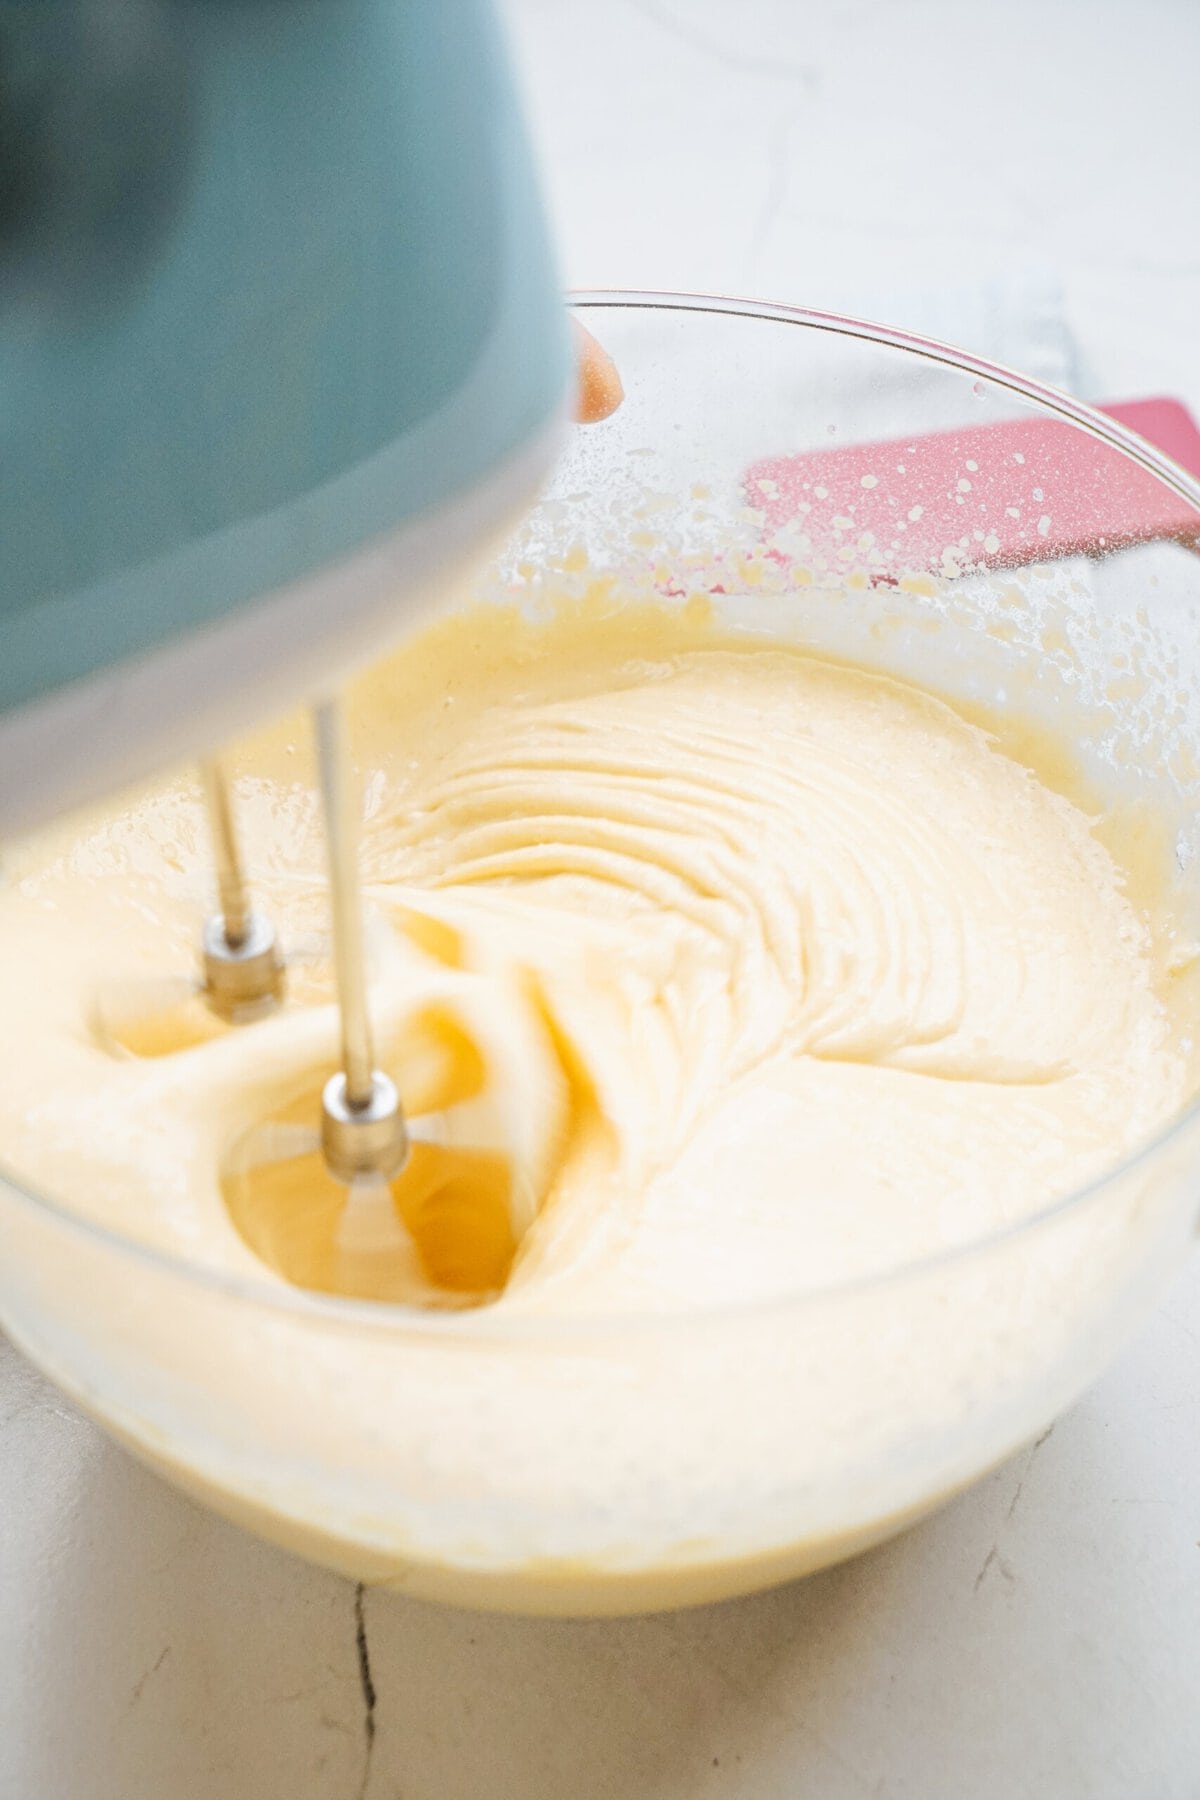 vanilla cake batter being whisked with an electric mixer